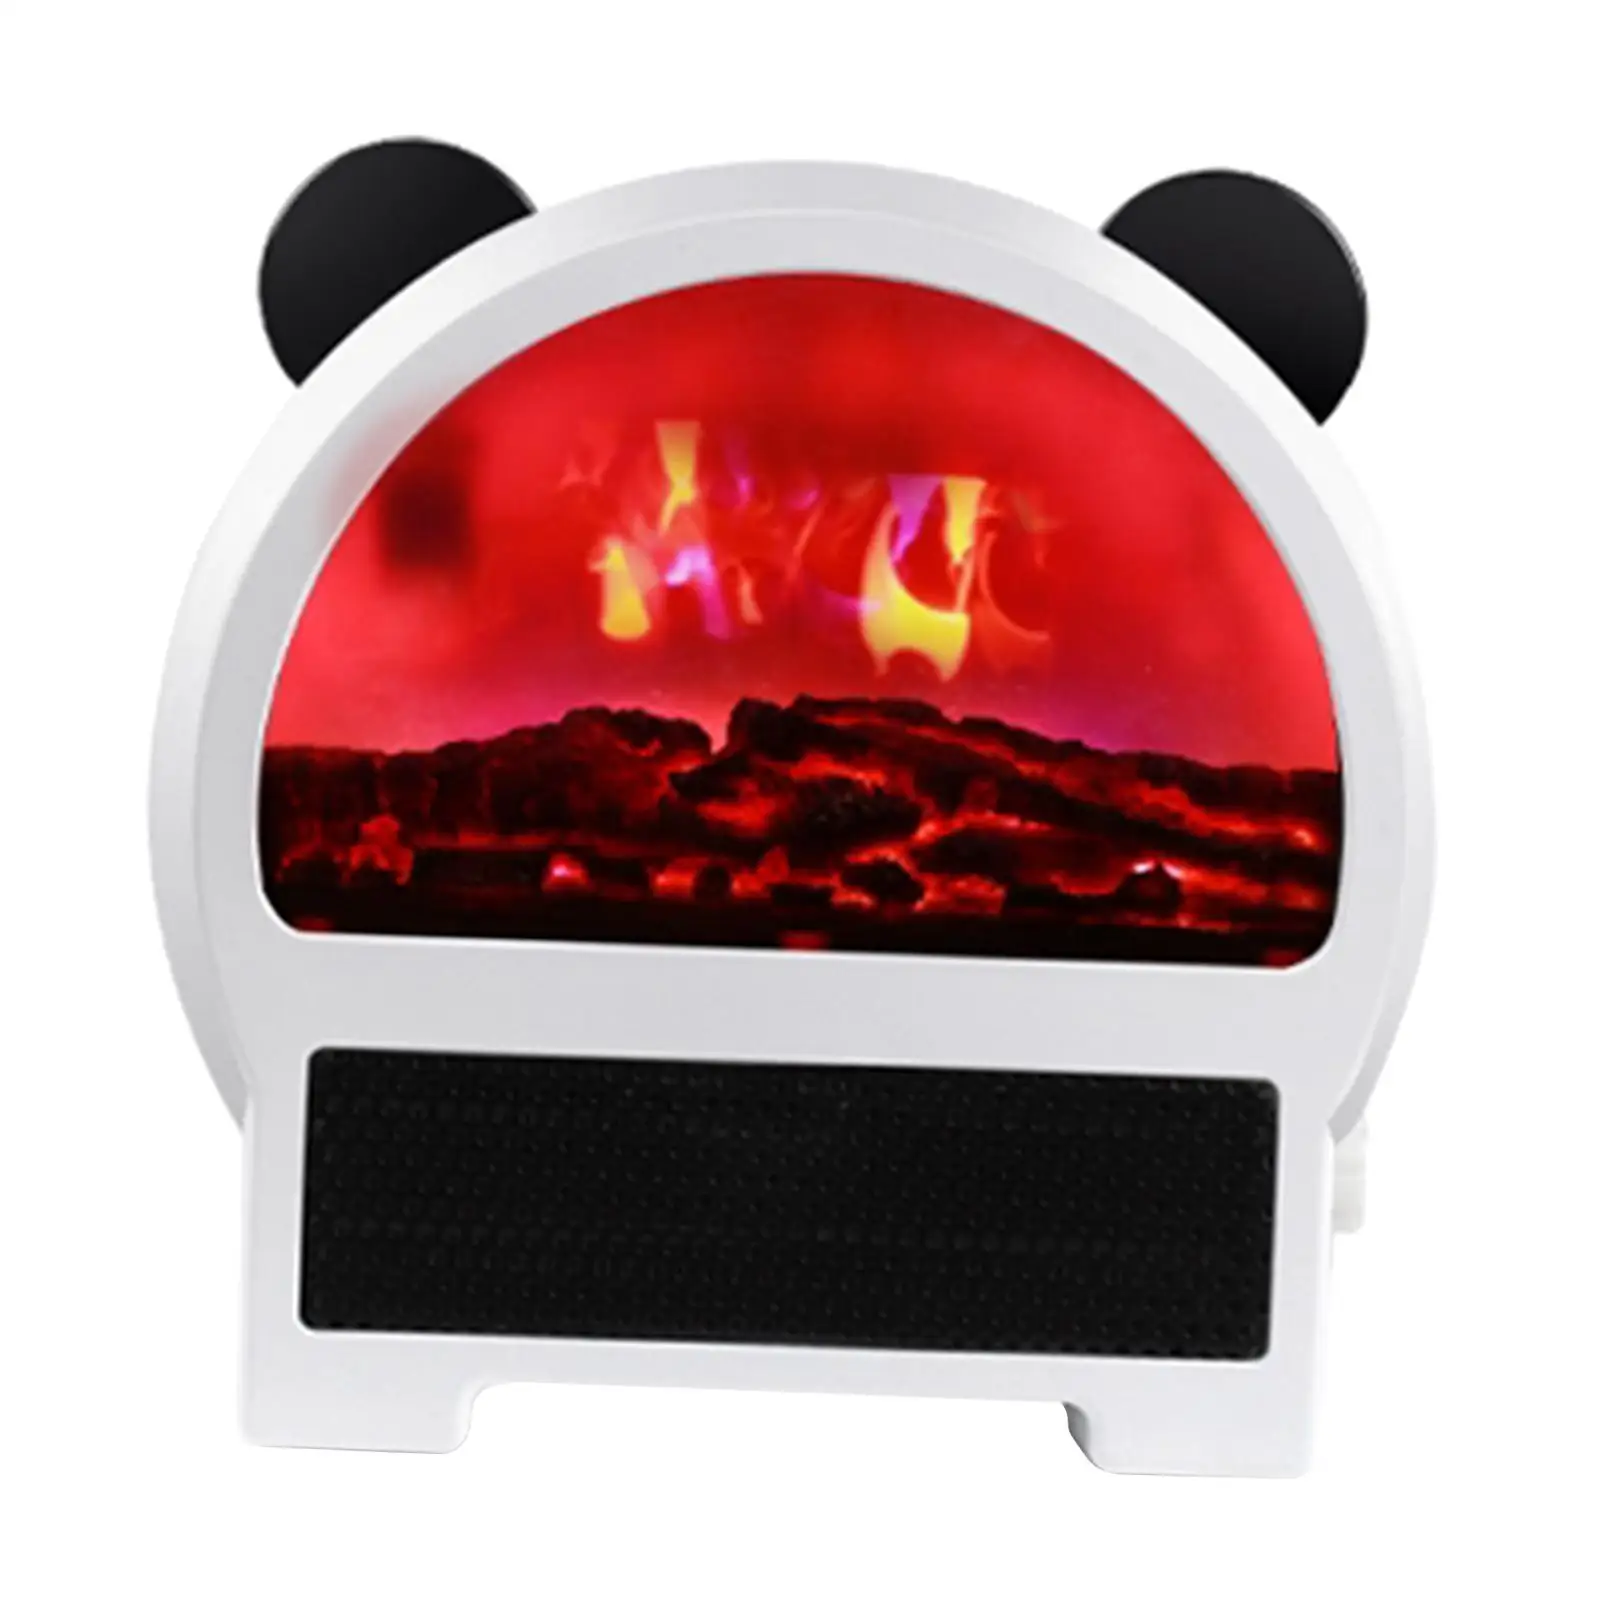 Portable Fan Heaters PTC Ceramic Heating Cute Gifts Electric Air Warmer for Dormitory Bedroom Traveling Desktop Kitchen